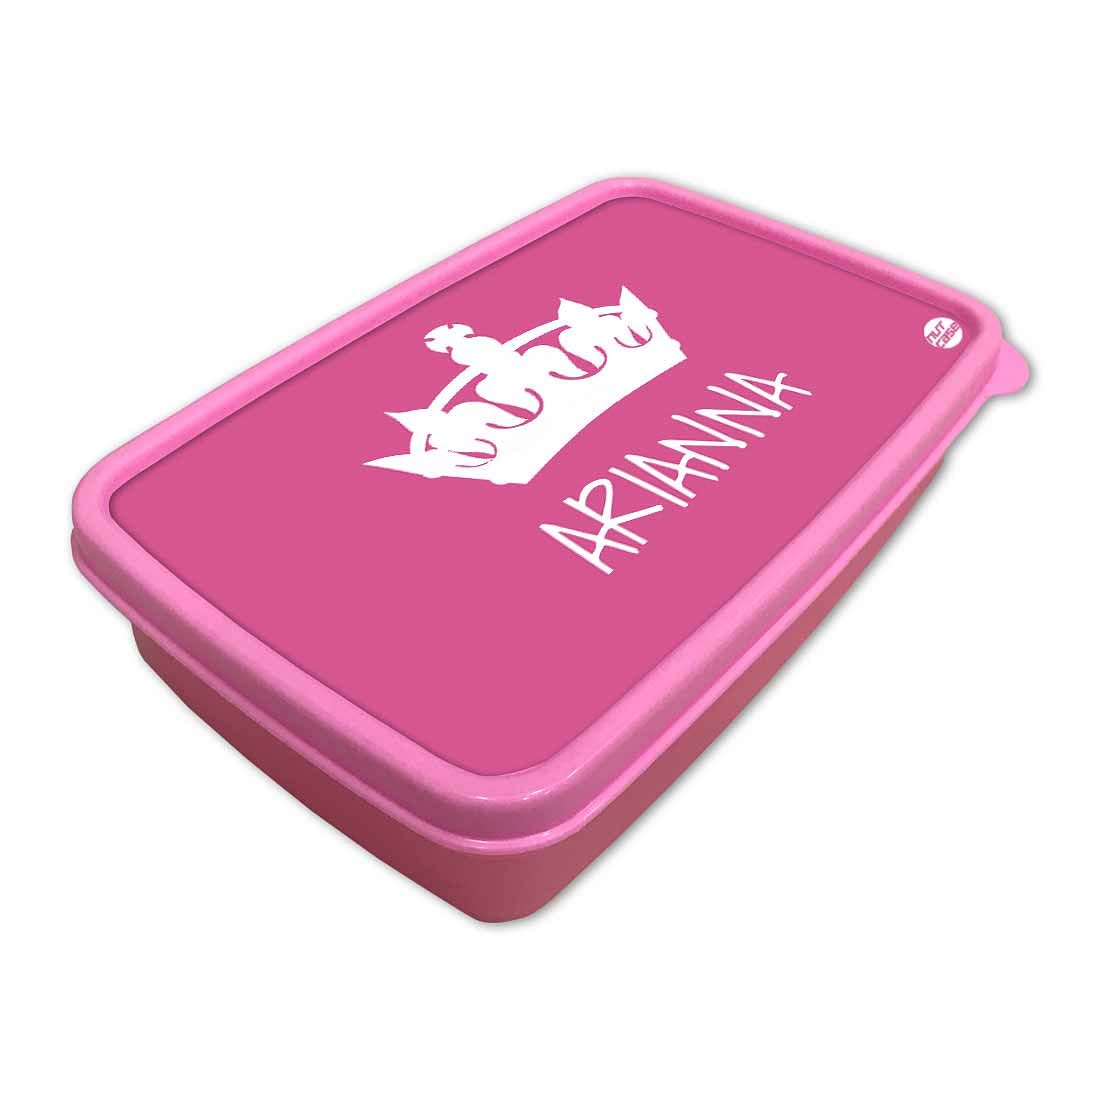 Personalized Snack Box for Kids Plastic Lunch Box for Girls - Princess Nutcase